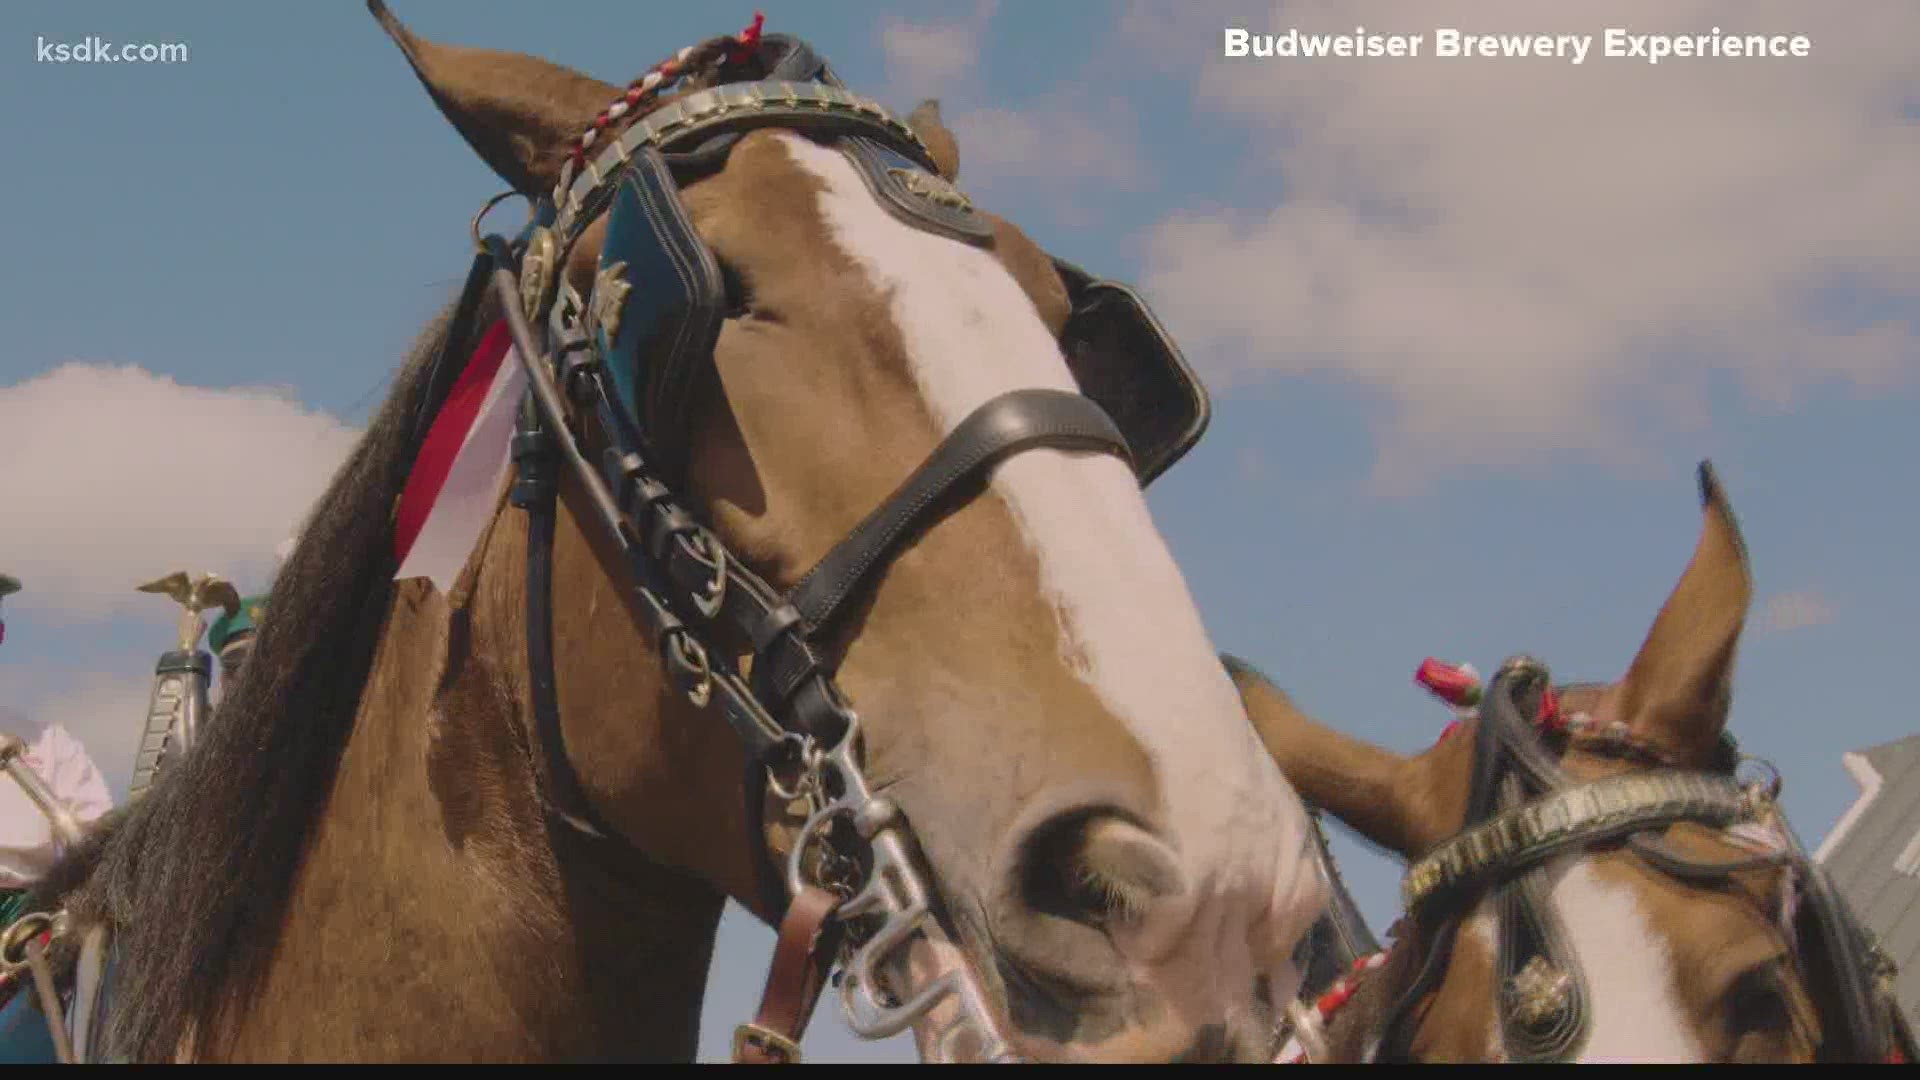 They're back! The one-and-only Clydesdales are back for Opening Day in St. Louis on Thursday